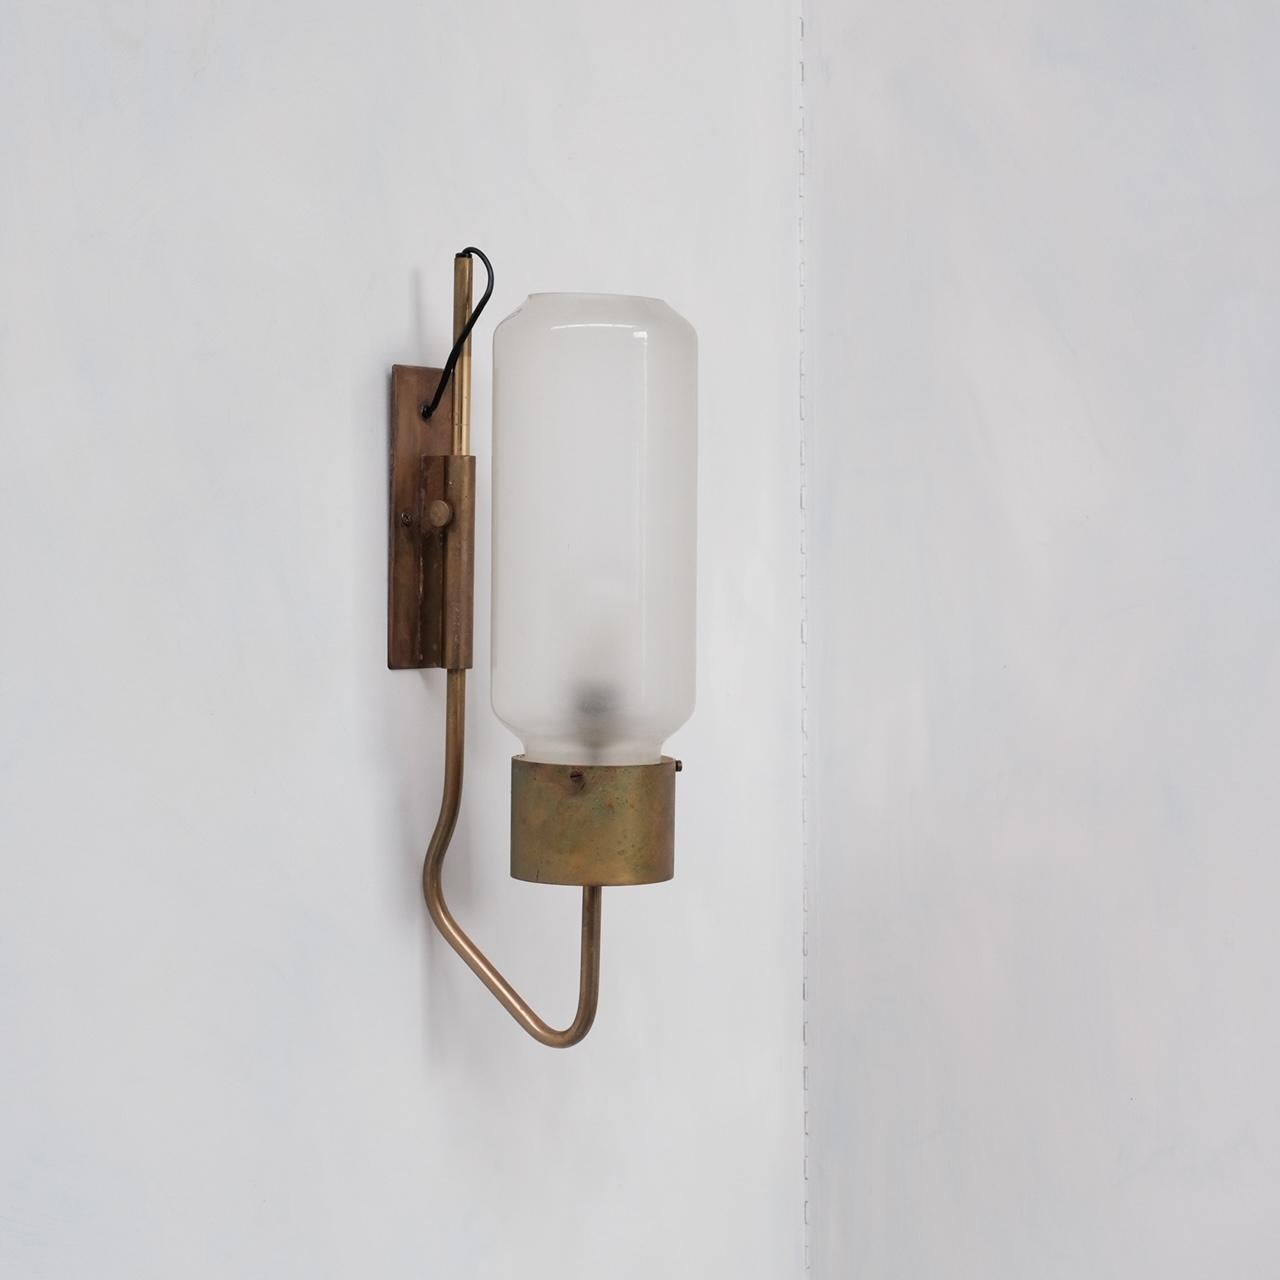 A rare wall light by Luigi Caccia Dominioni. 

'Bidone' LP10 Model. 

Italy, c1960s. 

Can be hung either way. 

Remains in good condition with great patina. 

The light could be polished to taste. 

Since re-wired and PAT tested.